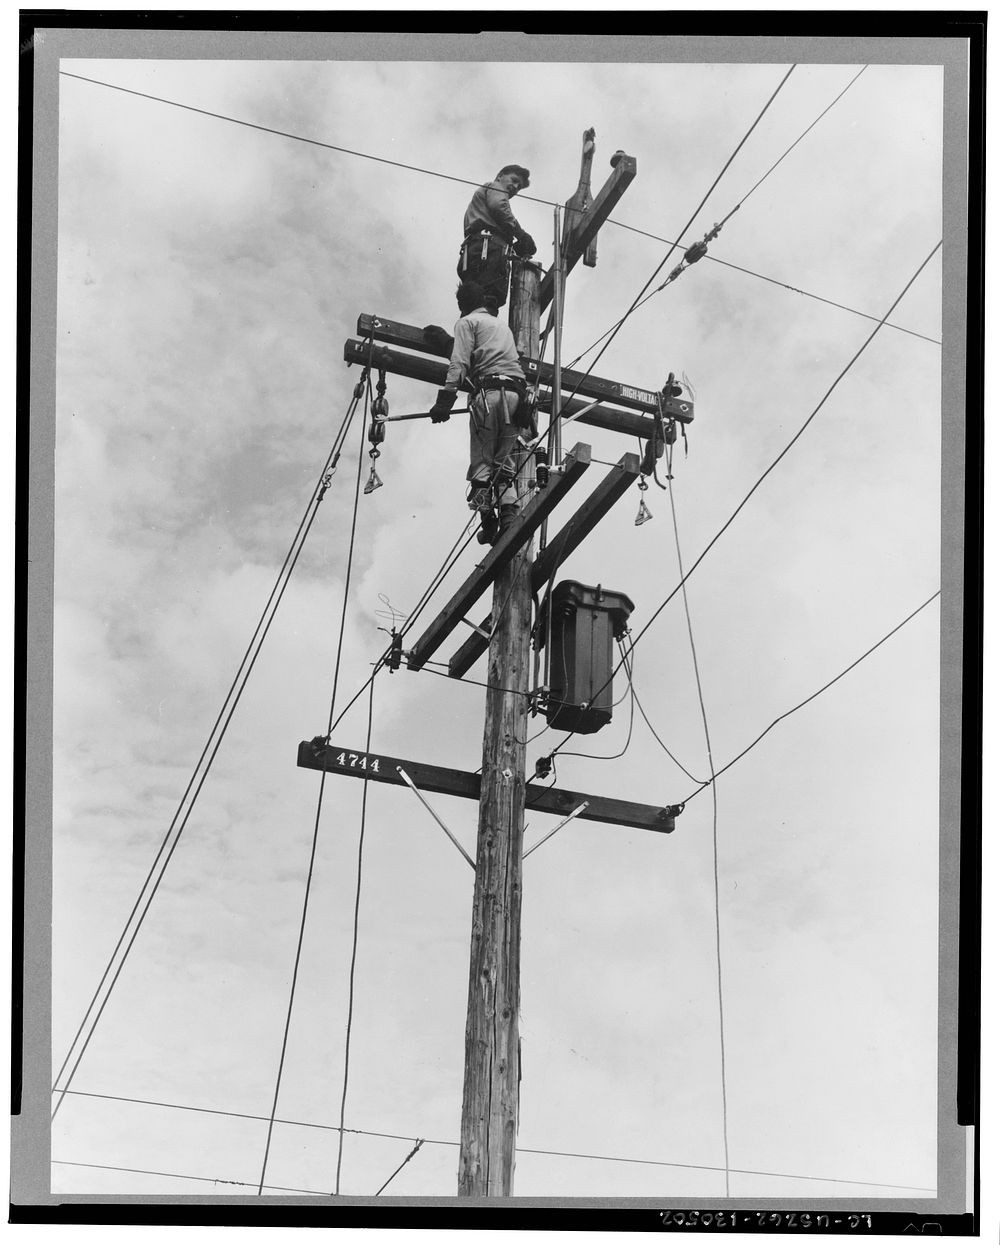 Rural electrification. San Joaquin Valley, California. Sourced from the Library of Congress.